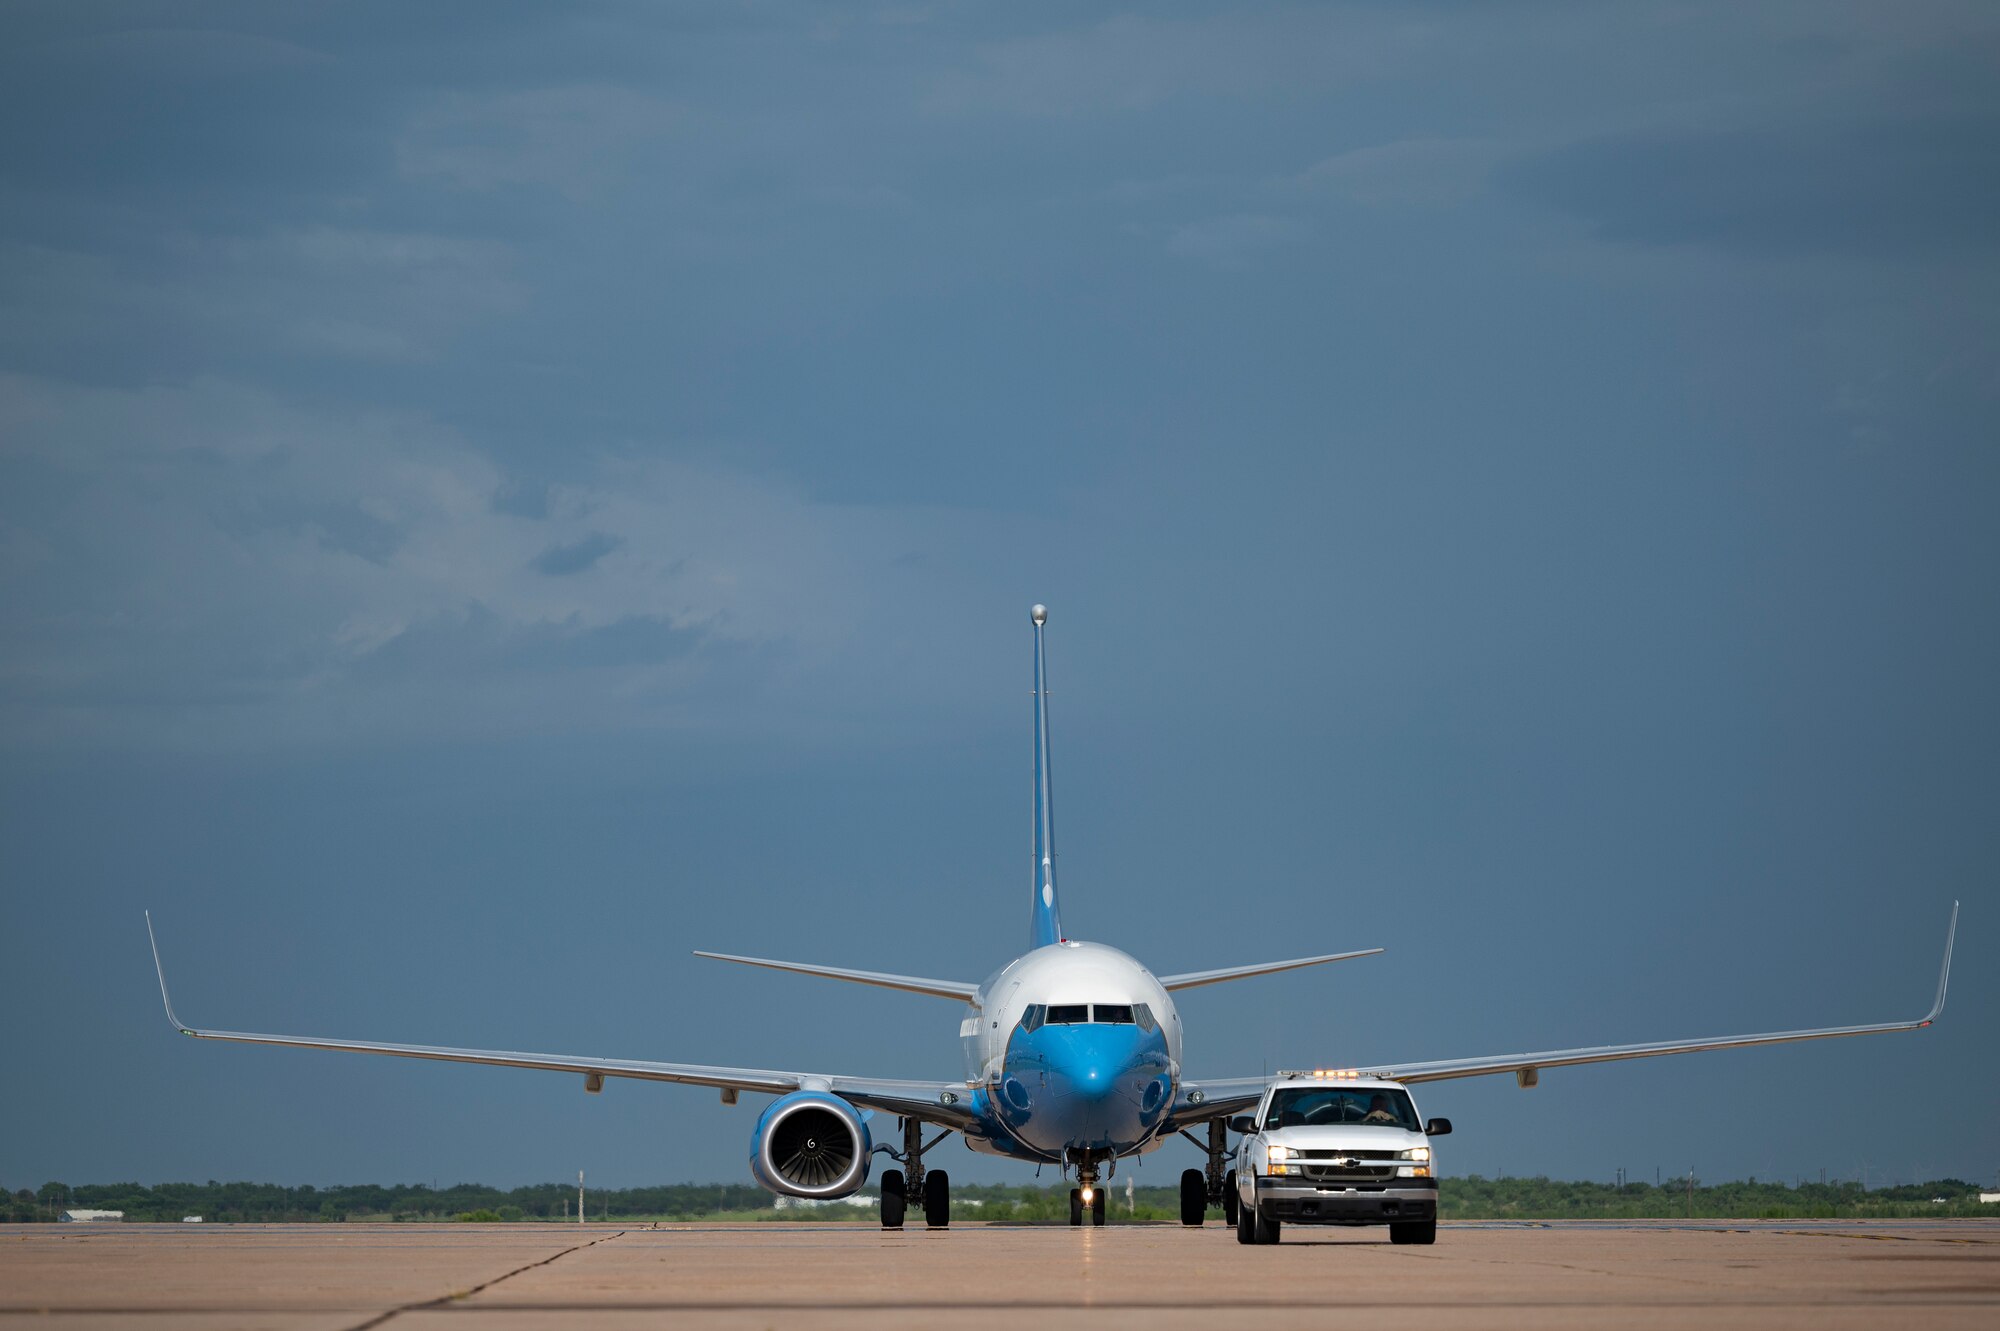 A Boeing C-40C taxis on the flightline after arriving at Dyess Air Force Base, Texas, July 28, 2021. U.S. Army Gen. Stephen R. Lyons, U.S. Transportation Command commander, visited Dyess AFB and met with Airmen assigned to the 39th Airlift Squadron to learn more about the squadron’s accomplishments during a recent deployment. (U.S. Air Force photo by Senior Airman Colin Hollowell)